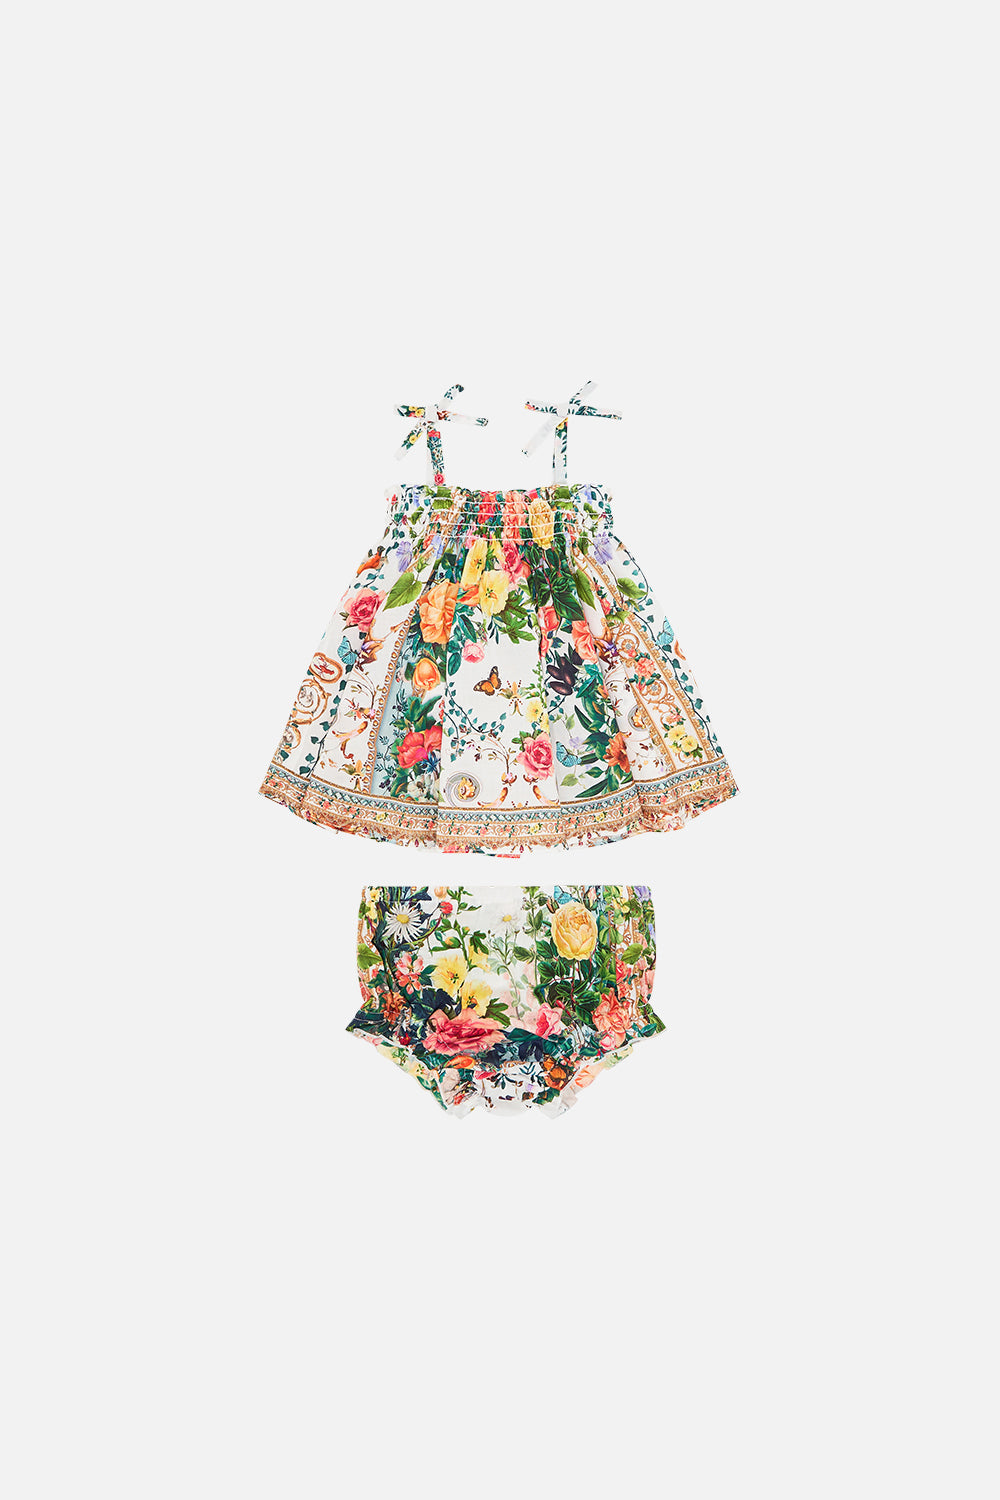 Product view of Milla By CAMILLA babies bloomer set in Renaissance Romance print 